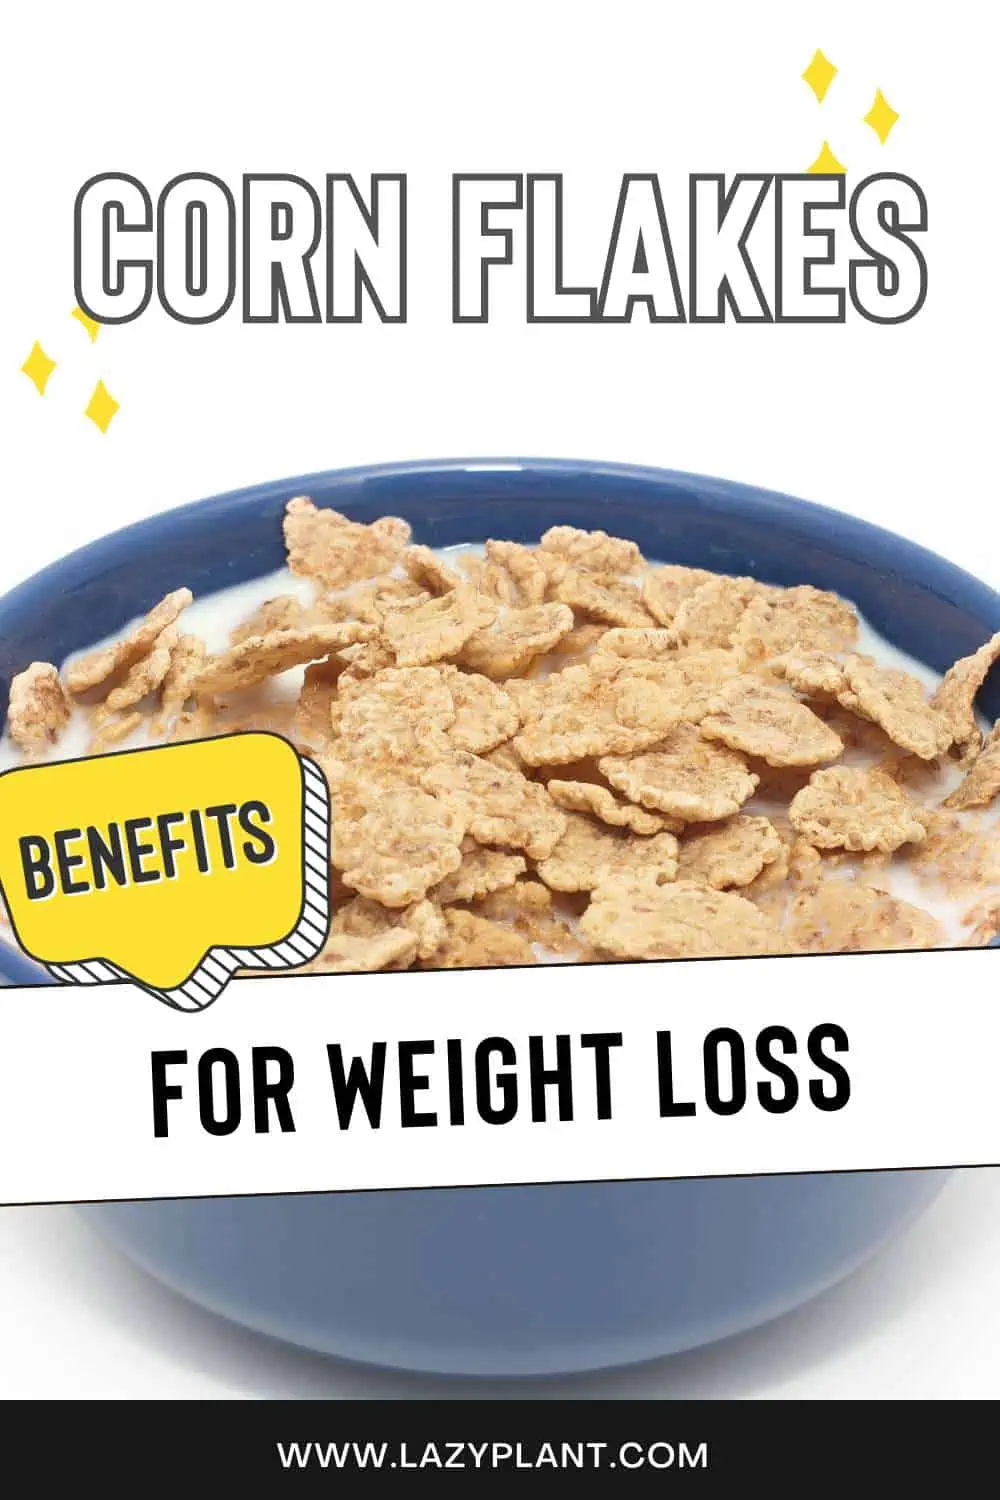 How many corn flakes can I eat in a day while dieting?